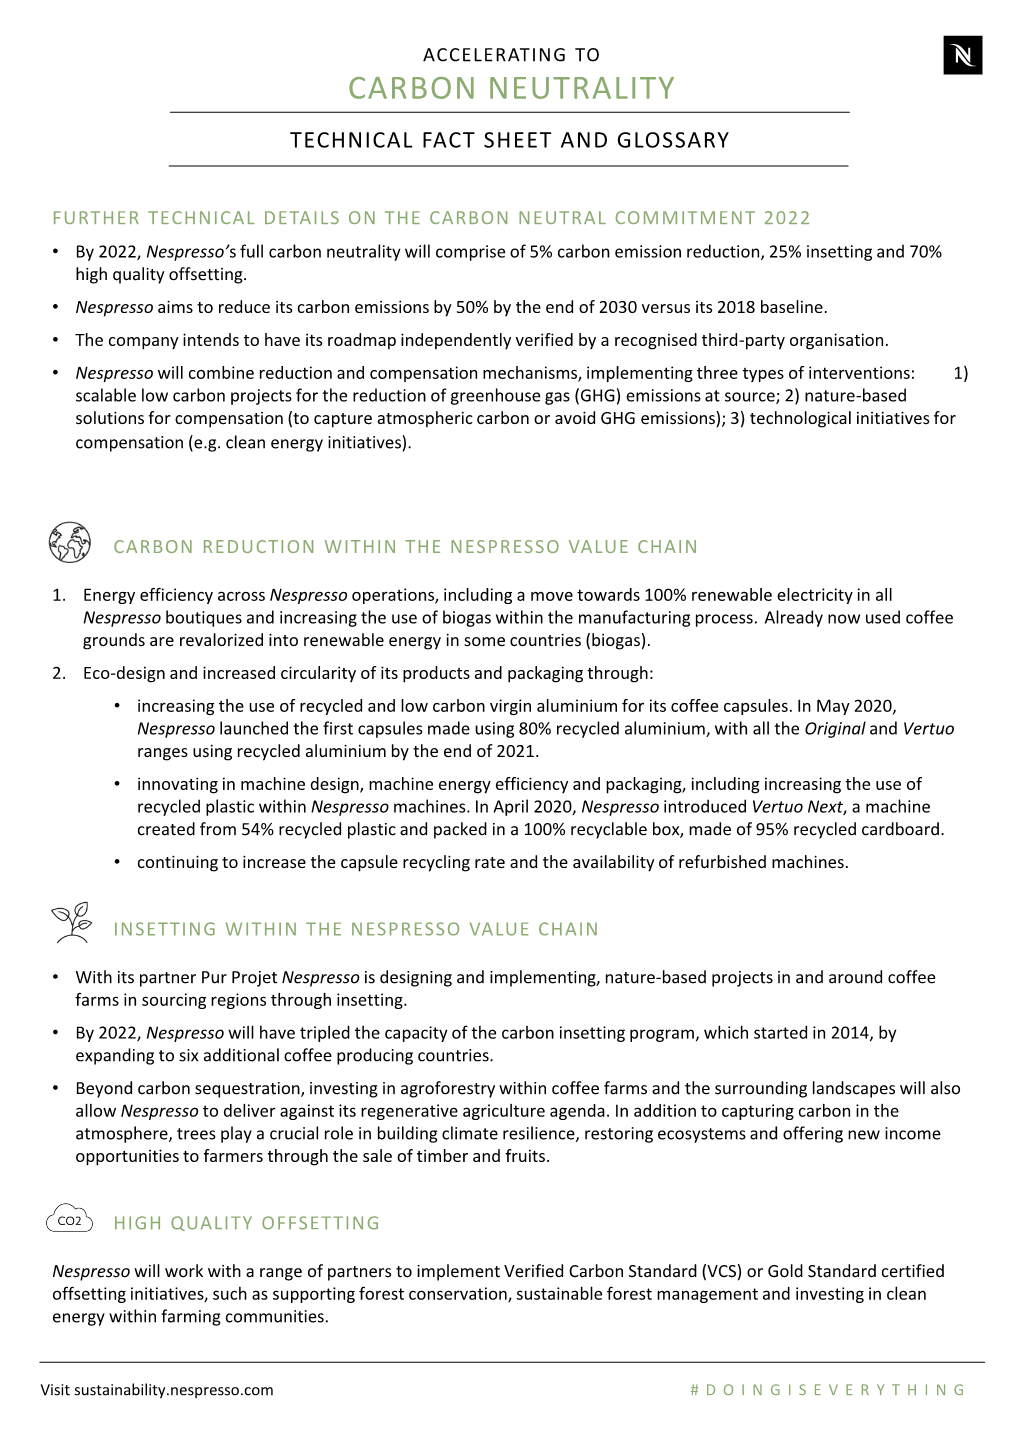 Carbon Neutrality Technical Fact Sheet and Glossary